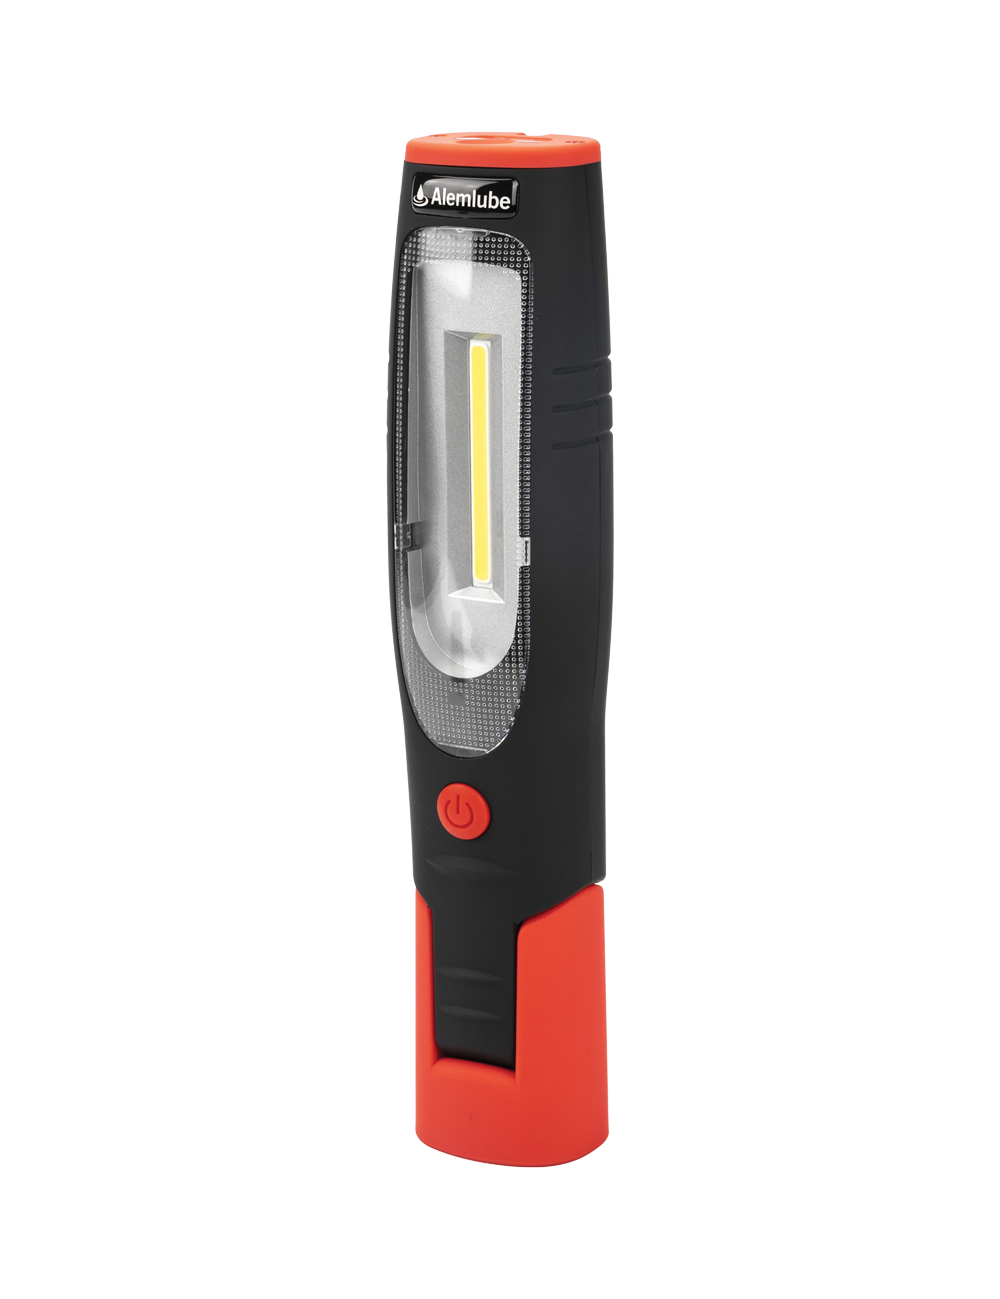 LED Work Light with Aircon Gas Leak Detection Capabilities